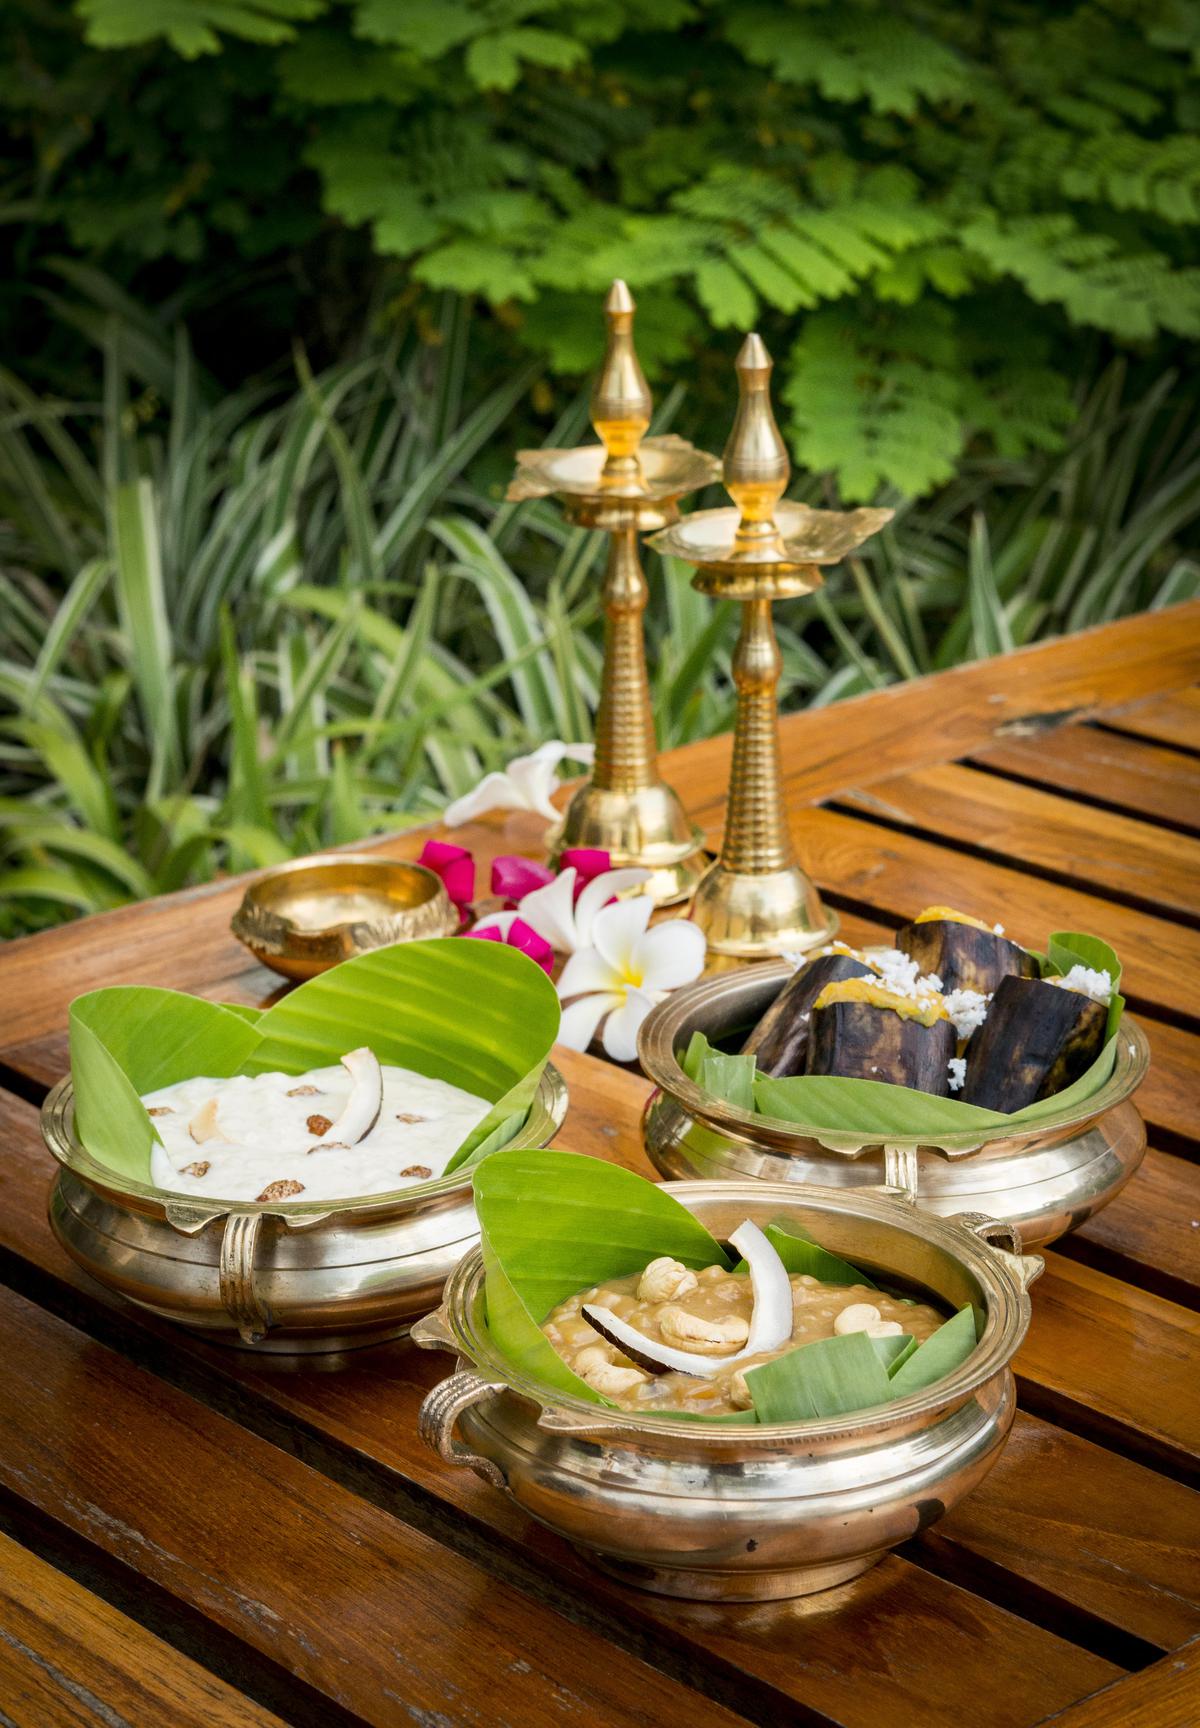 Onam offerings at ITC Grand Chola